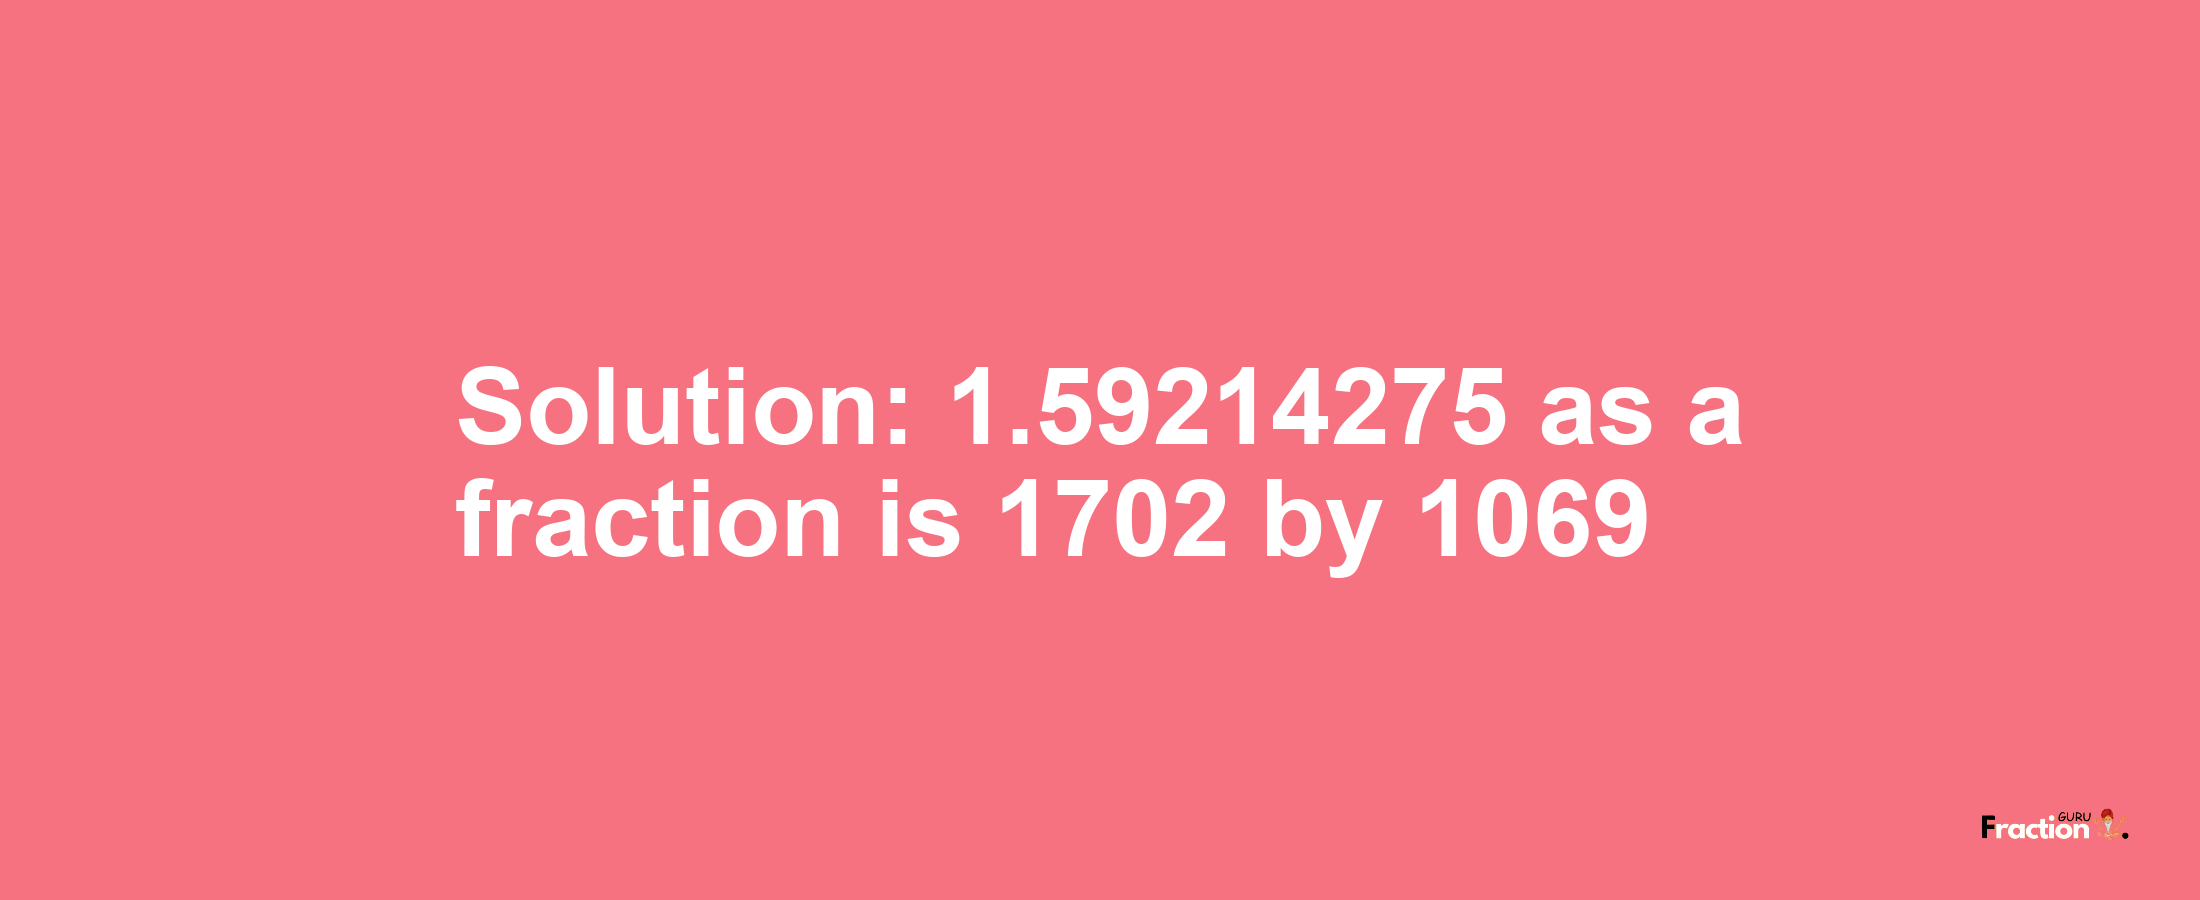 Solution:1.59214275 as a fraction is 1702/1069